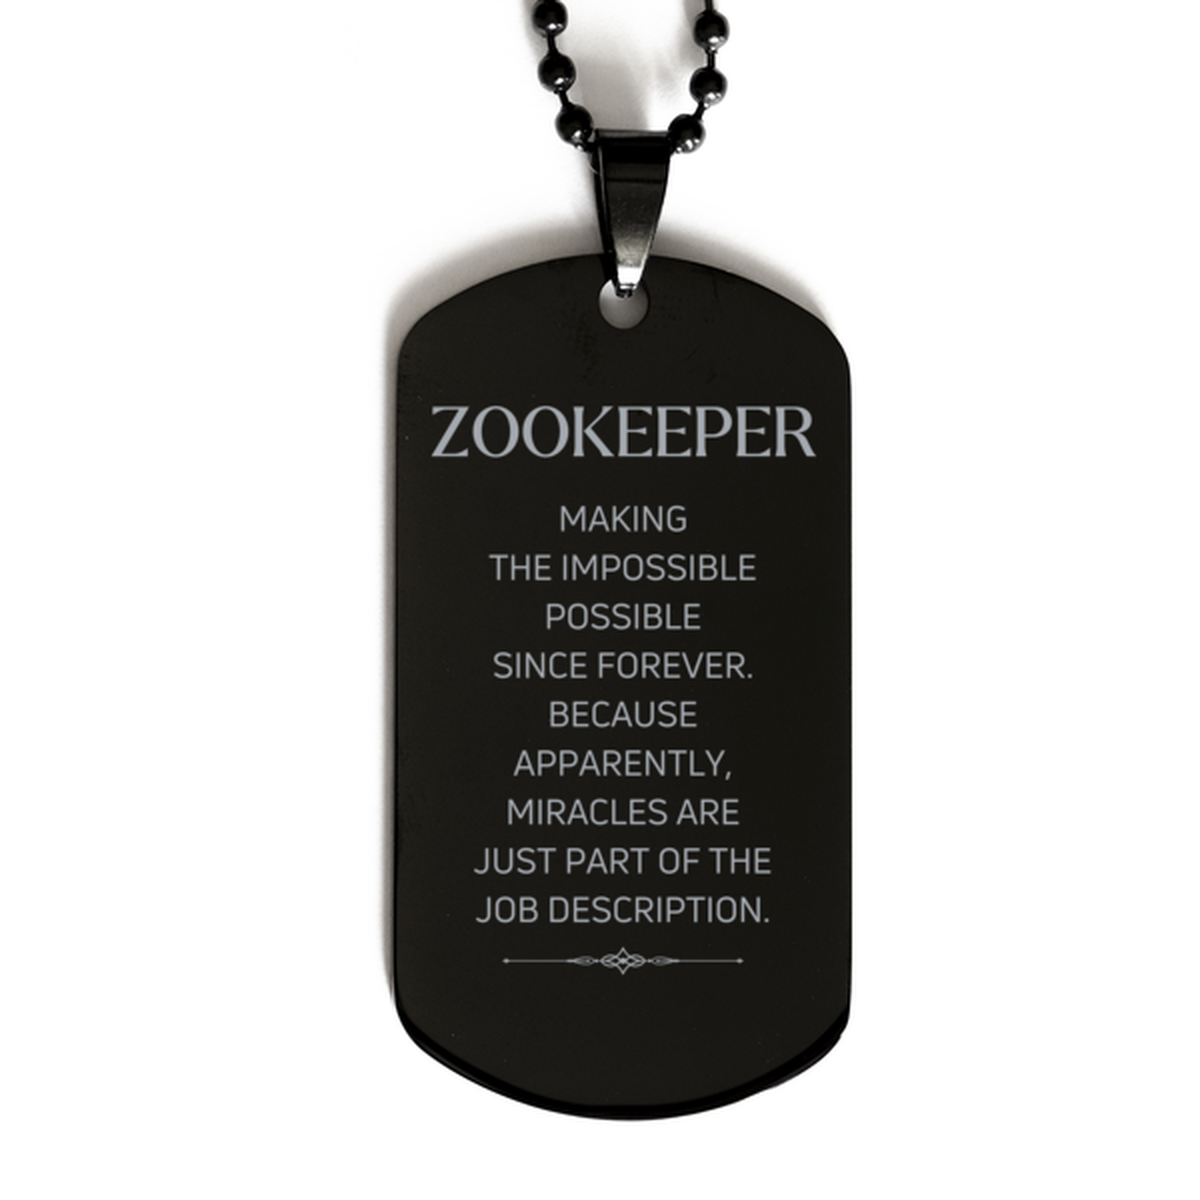 Funny Zookeeper Gifts, Miracles are just part of the job description, Inspirational Birthday Black Dog Tag For Zookeeper, Men, Women, Coworkers, Friends, Boss